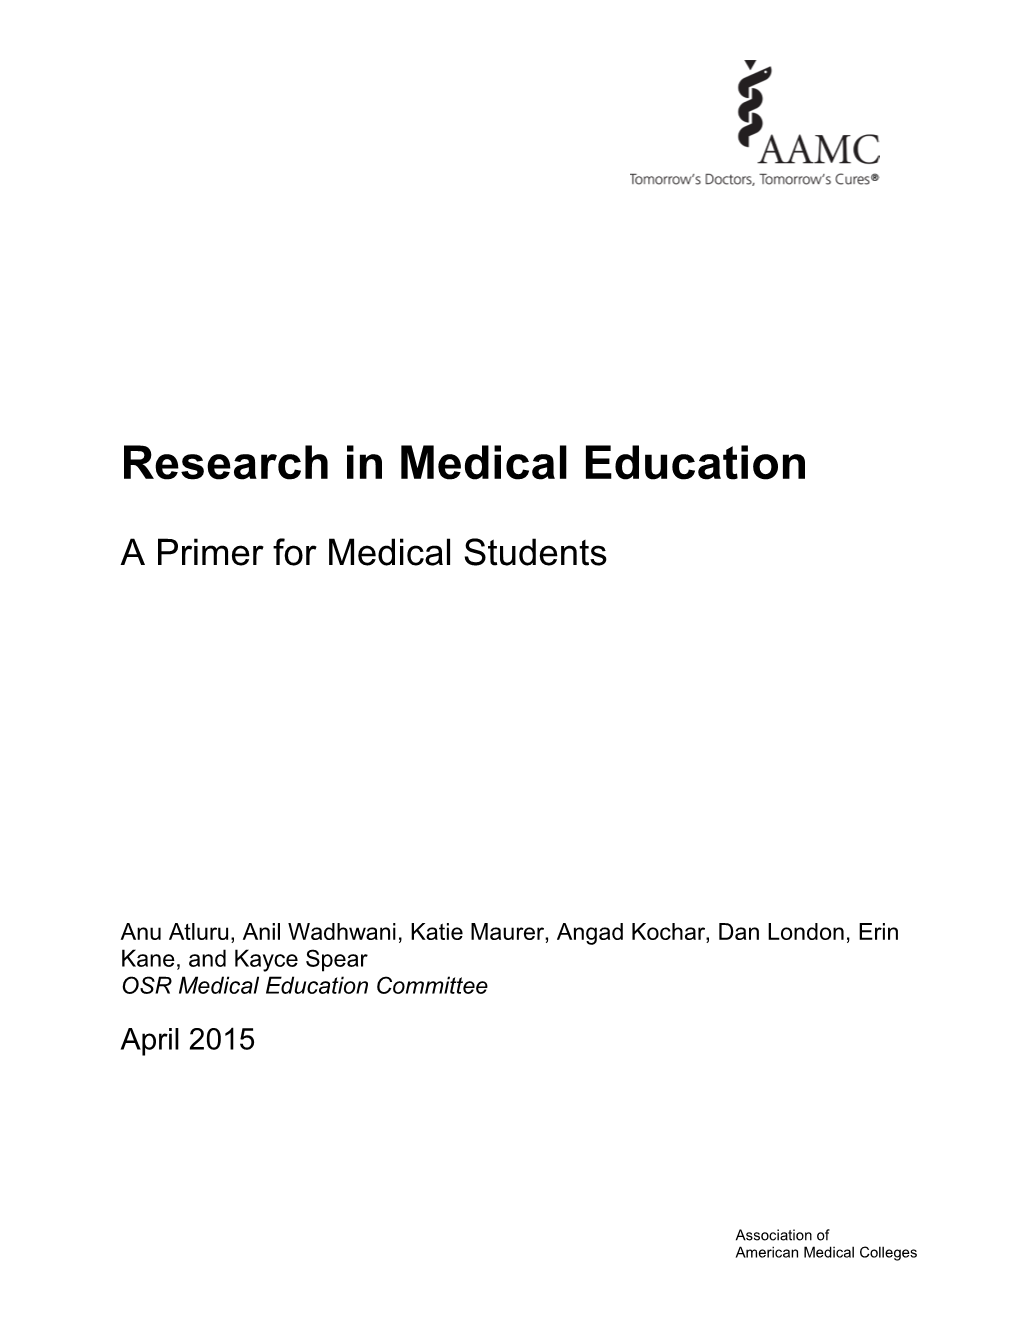 Research in Medical Education: a Primer for Medical Students